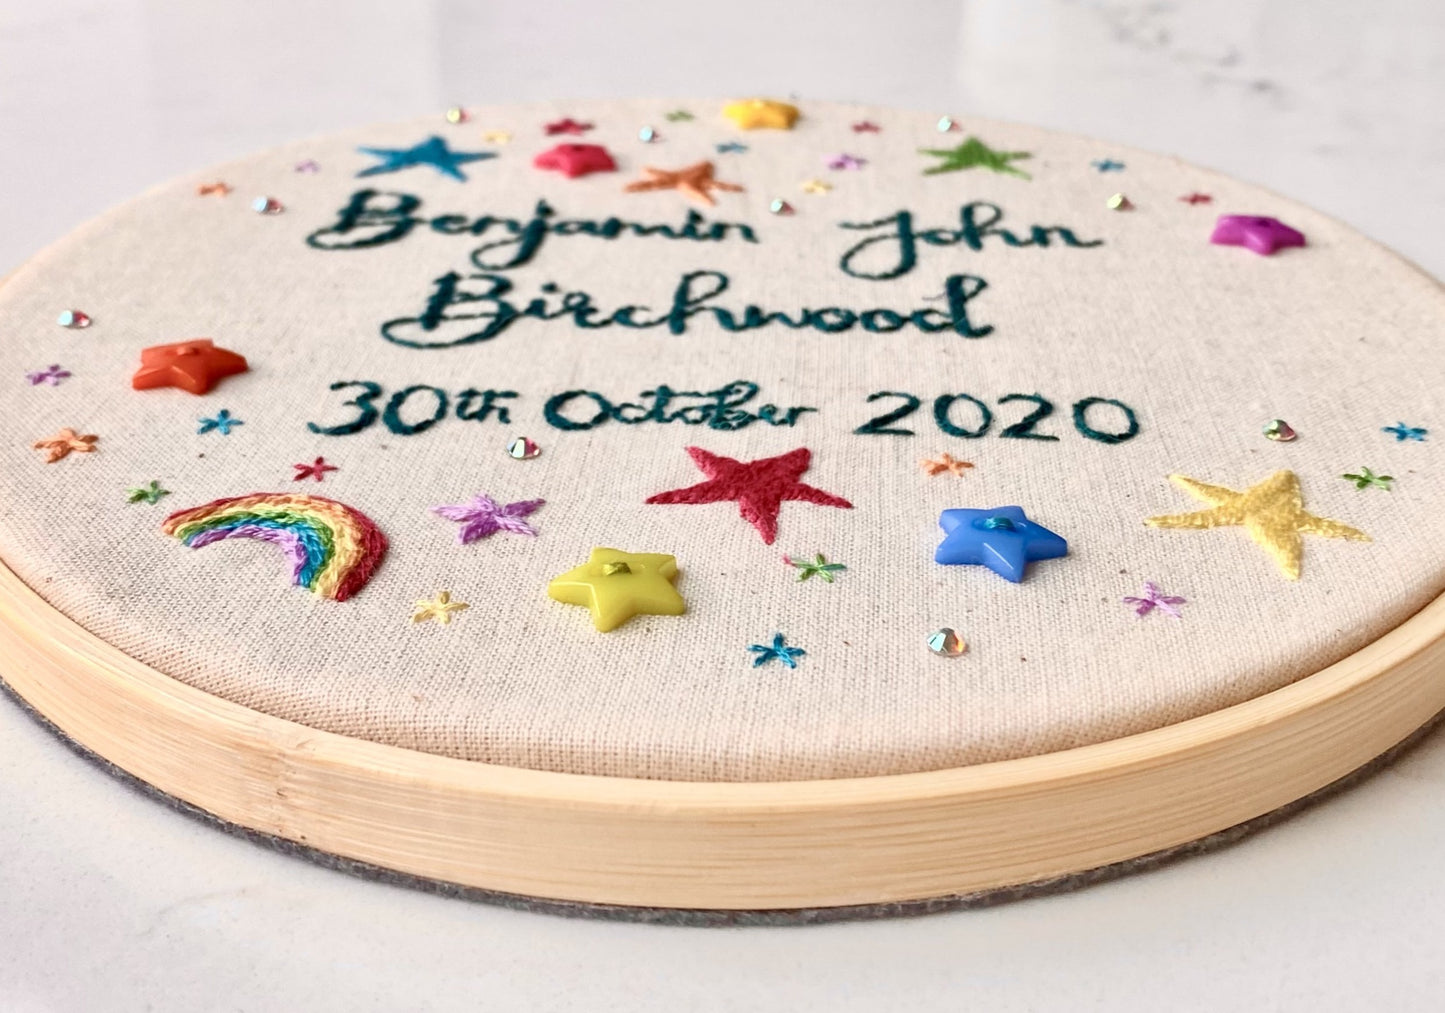 Stars and sparkles embroidery hoop